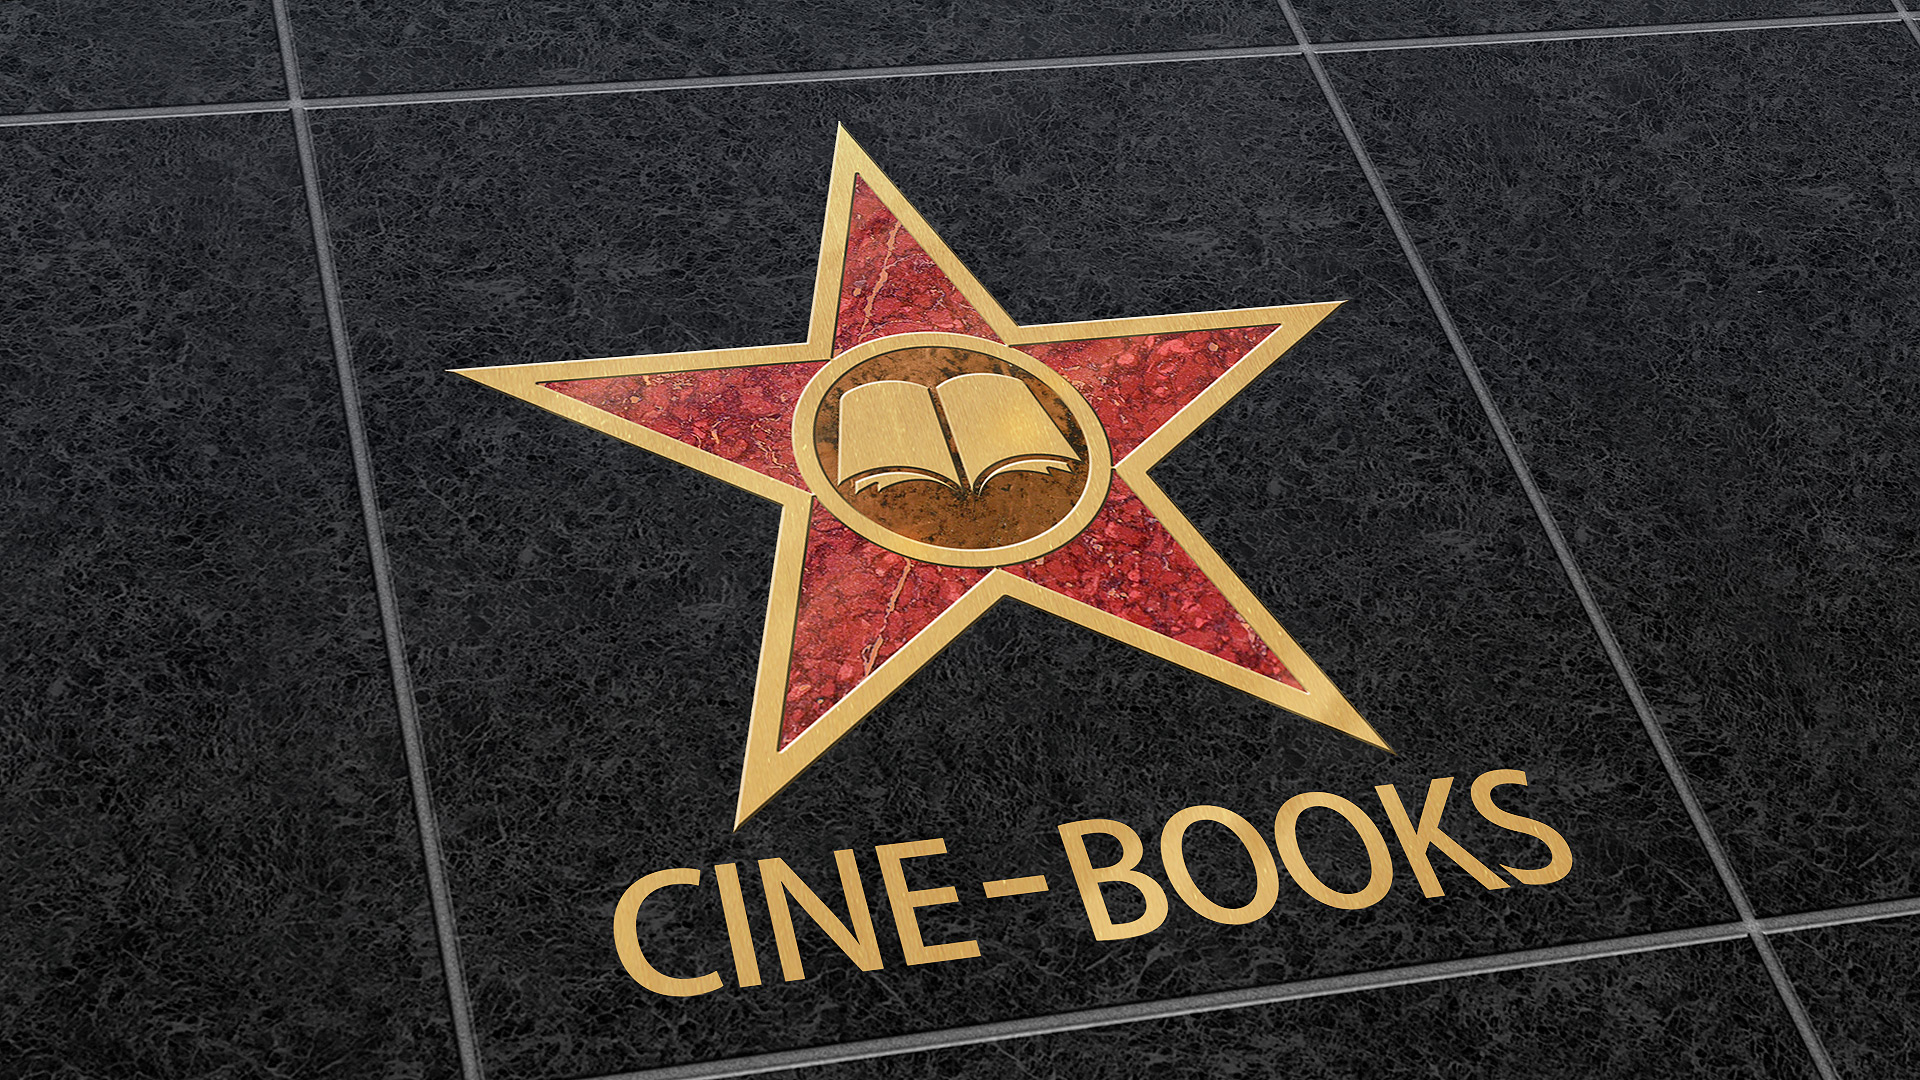 The Star of Fame is CINE-BOOKS logo and mark of quality (cover)